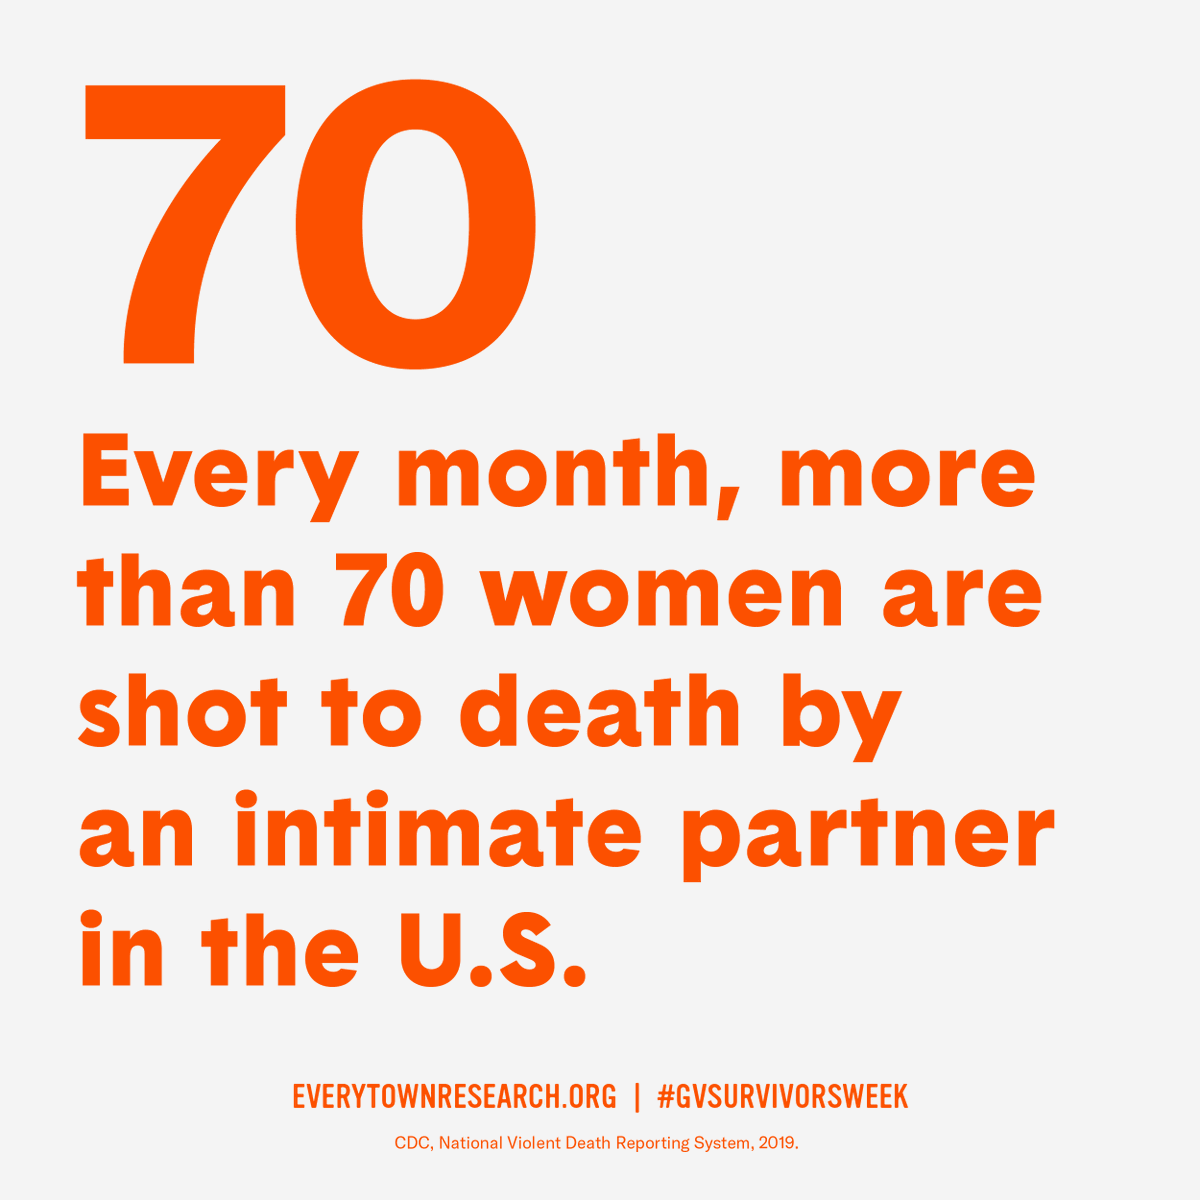 February 1–7 is National Gun Violence Survivors Week. Firearms contribute significantly to domestic violence in the U.S. Over half of all intimate partner homicides are committed with guns.

#GVSurvivorsWeek #domesticviolence #guns #wrcdv #DVhomicide